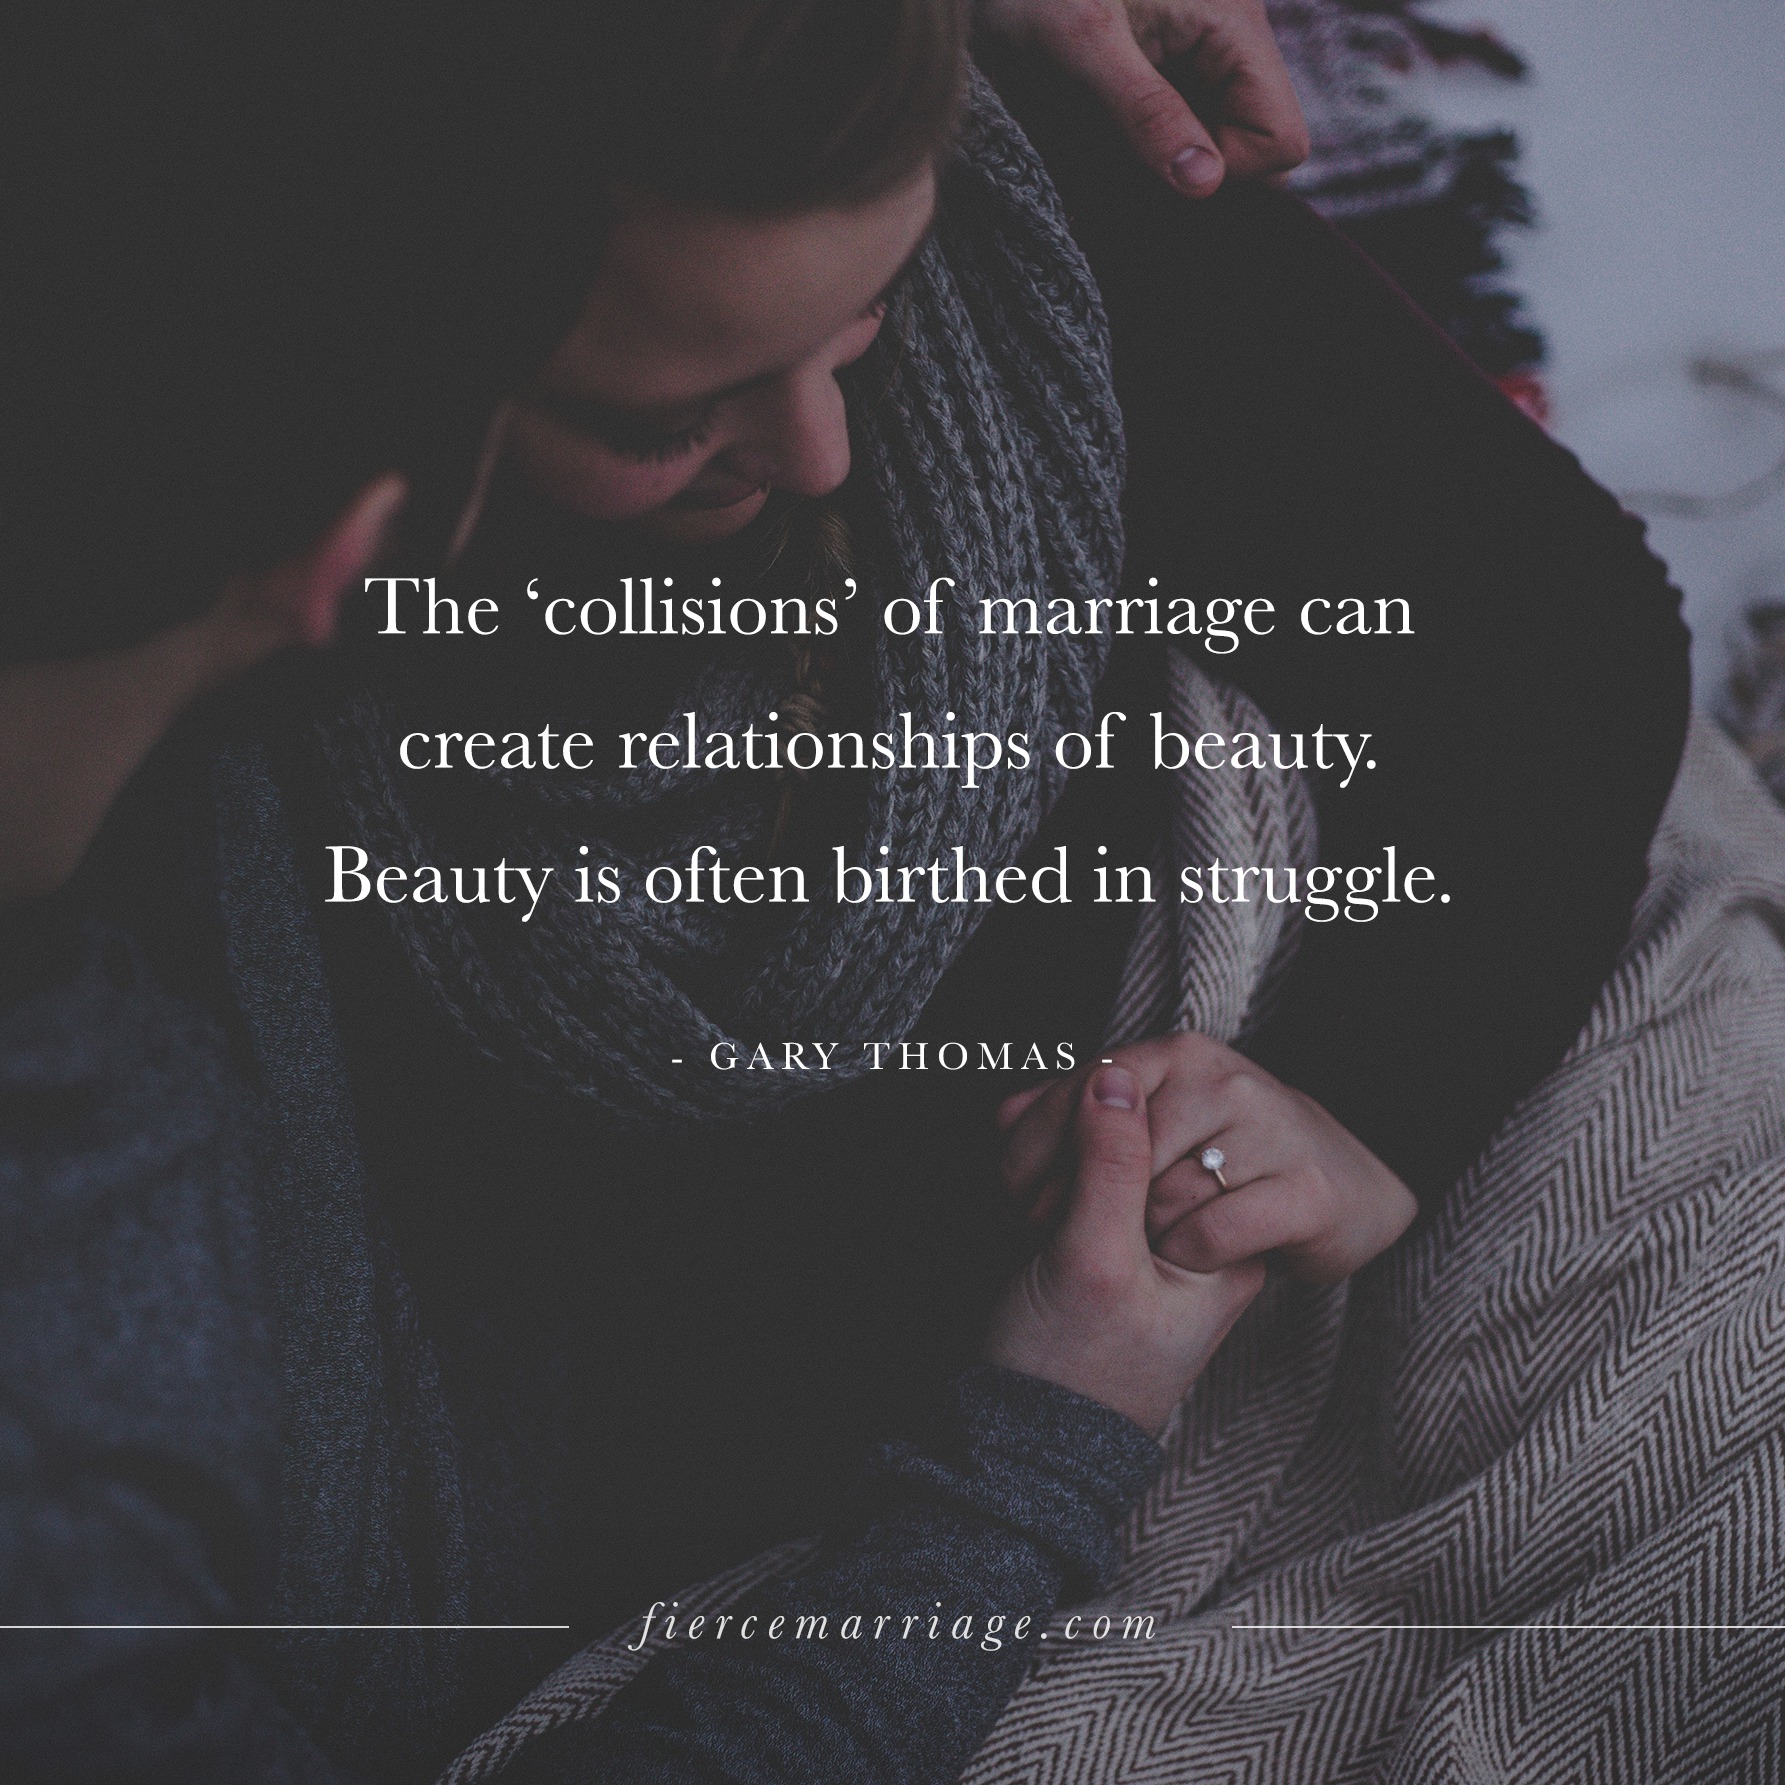 Struggling quotes couples for Struggling marriage?